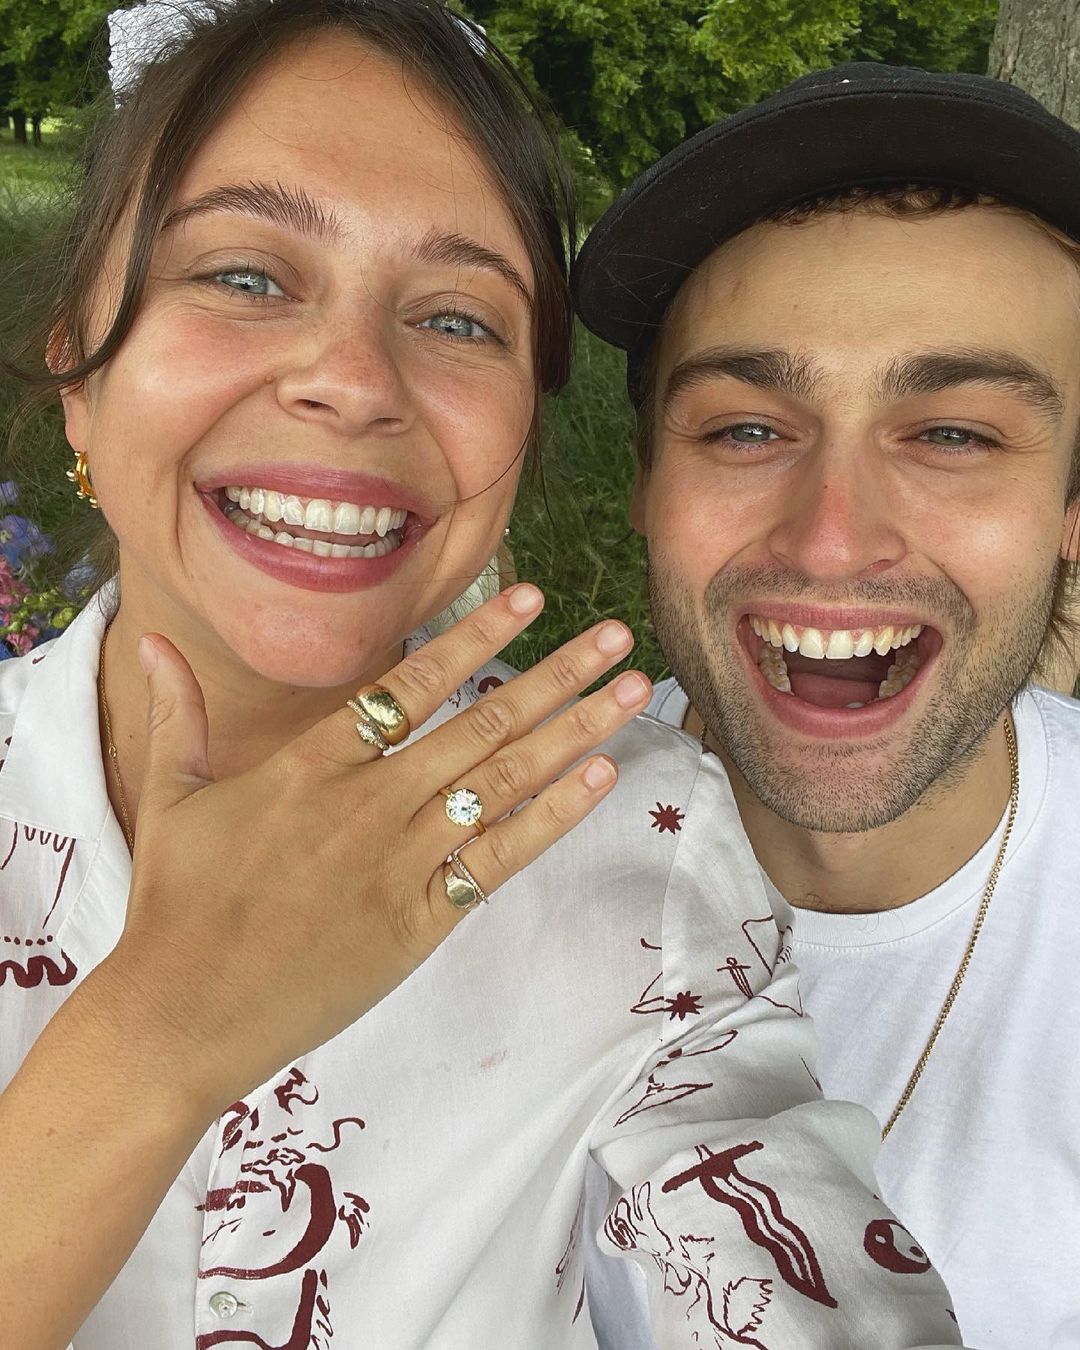 Bel Powley showing her engagement ring in a selfie with her fiance Douglas Booth.